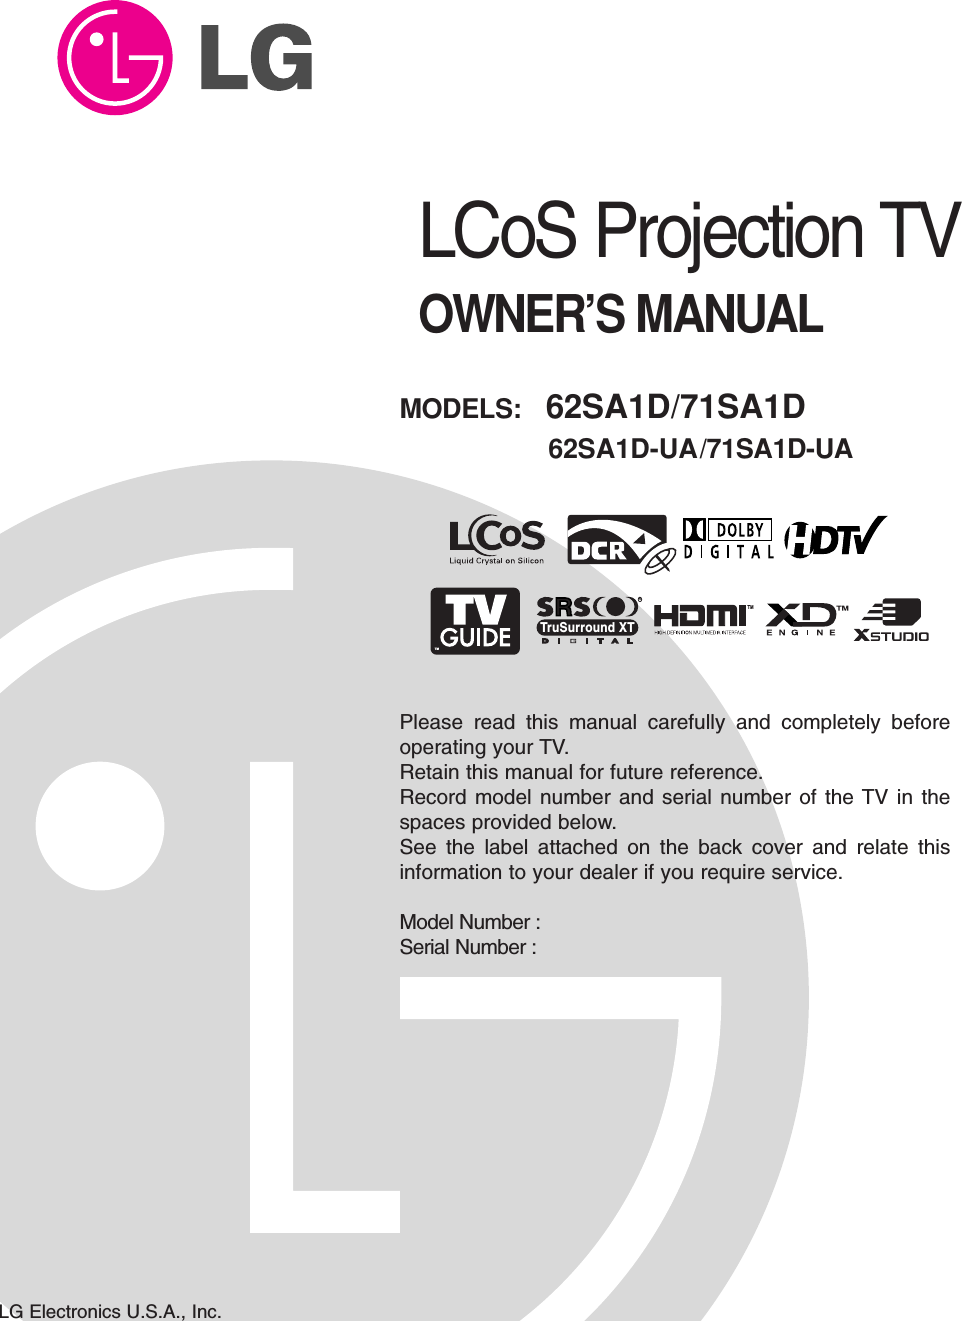 LCoS Projection TVOWNER’S MANUALMODELS:  62SA1D/71SA1D62SA1D-UA/71SA1D-UALG Electronics U.S.A., Inc.TMRTruSurround XTPlease read this manual carefully and completely beforeoperating your TV. Retain this manual for future reference.Record model number and serial number of the TV in thespaces provided below. See the label attached on the back cover and relate thisinformation to your dealer if you require service.Model Number : Serial Number : 